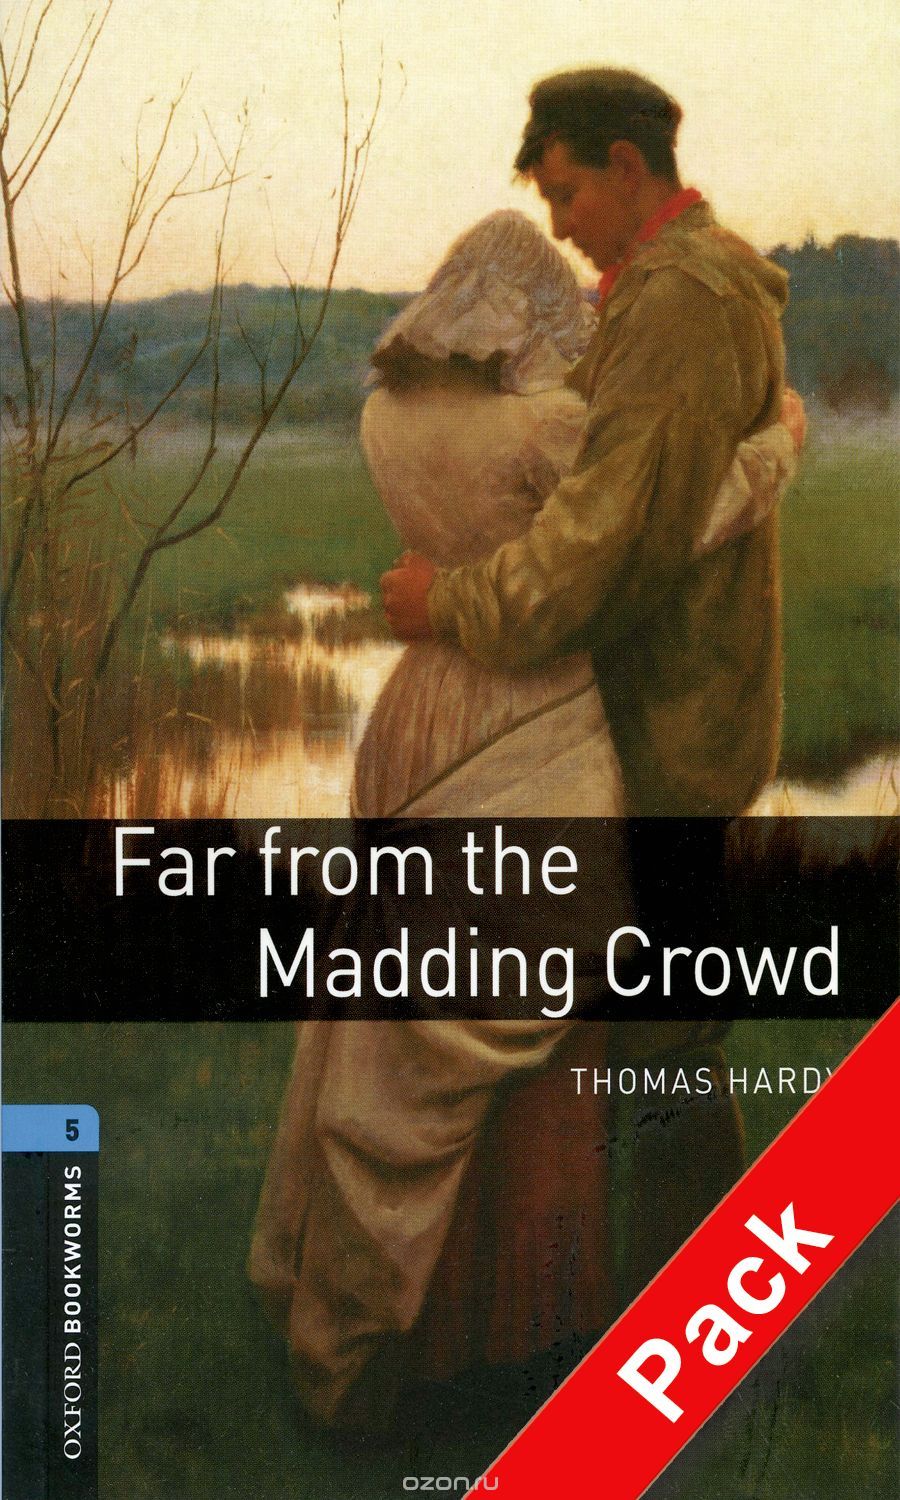 Скачать книгу "OXFORD bookworms library 5: FAR FROM MADDING CROWD PACK 3E"